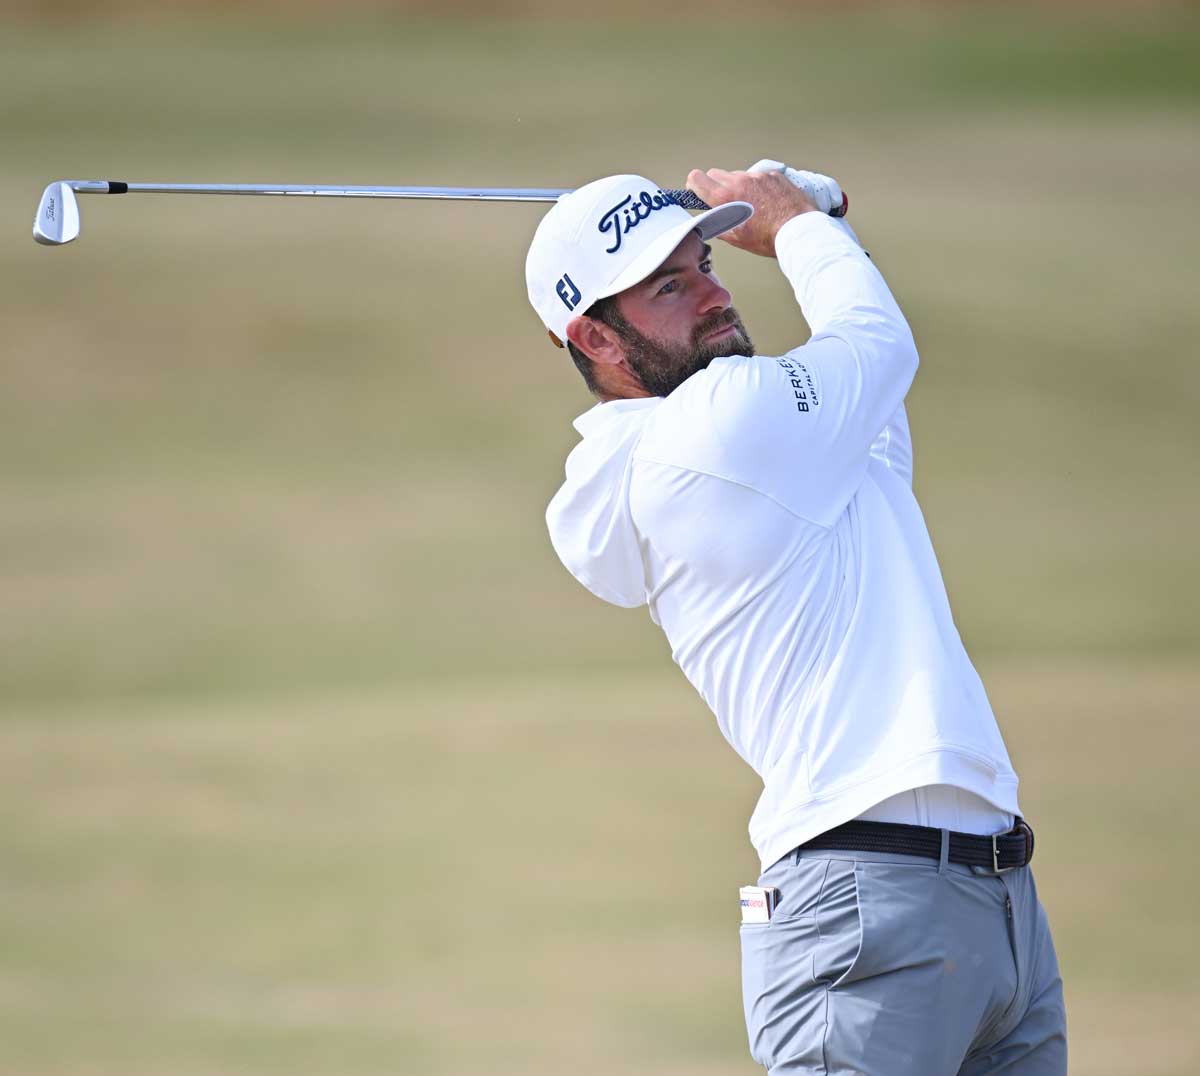 Cameron Smith 3rd after opening round 67 at St Andrews | Bruce Young Media